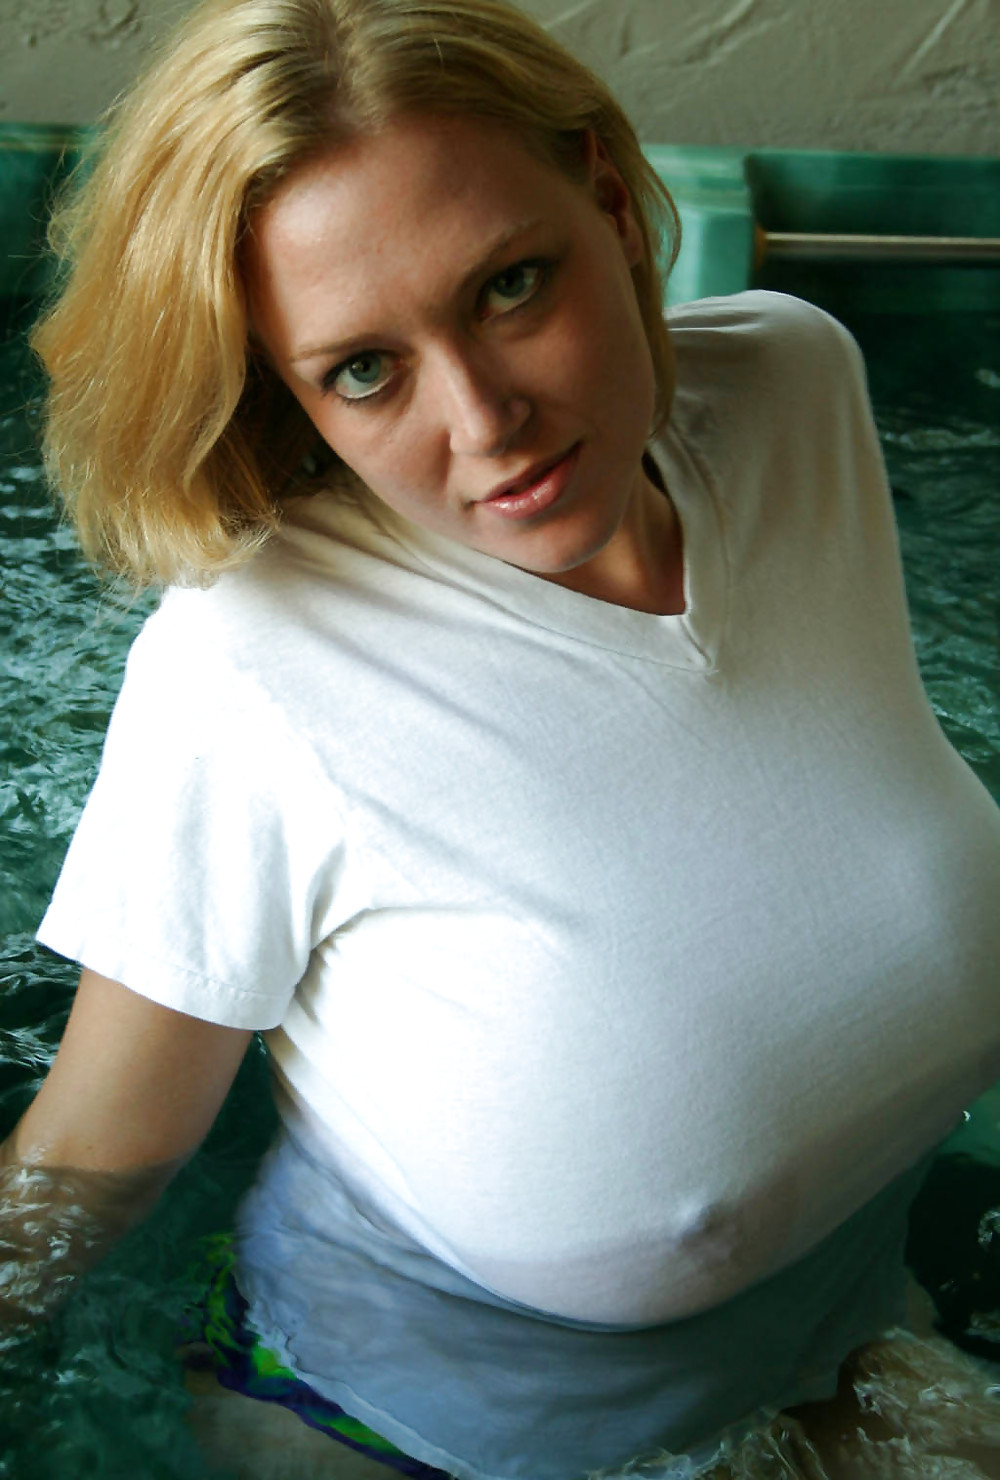 BIG BOOBS IN WET TSHIRT pict gal